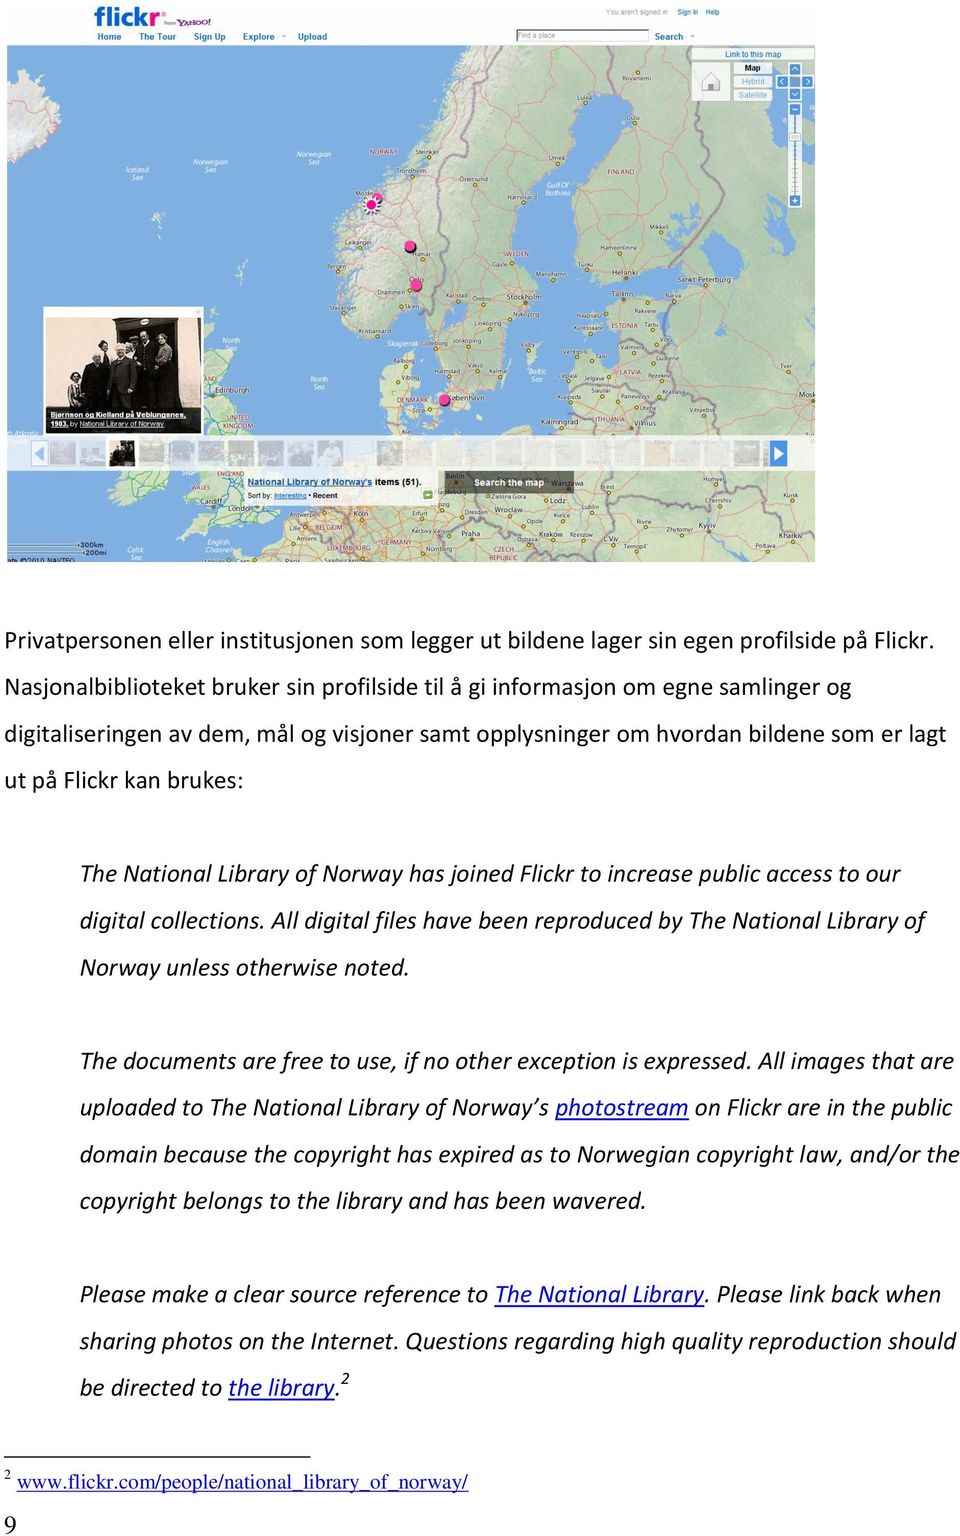 The National Library of Norway has joined Flickr to increase public access to our digital collections. All digital files have been reproduced by The National Library of Norway unless otherwise noted.